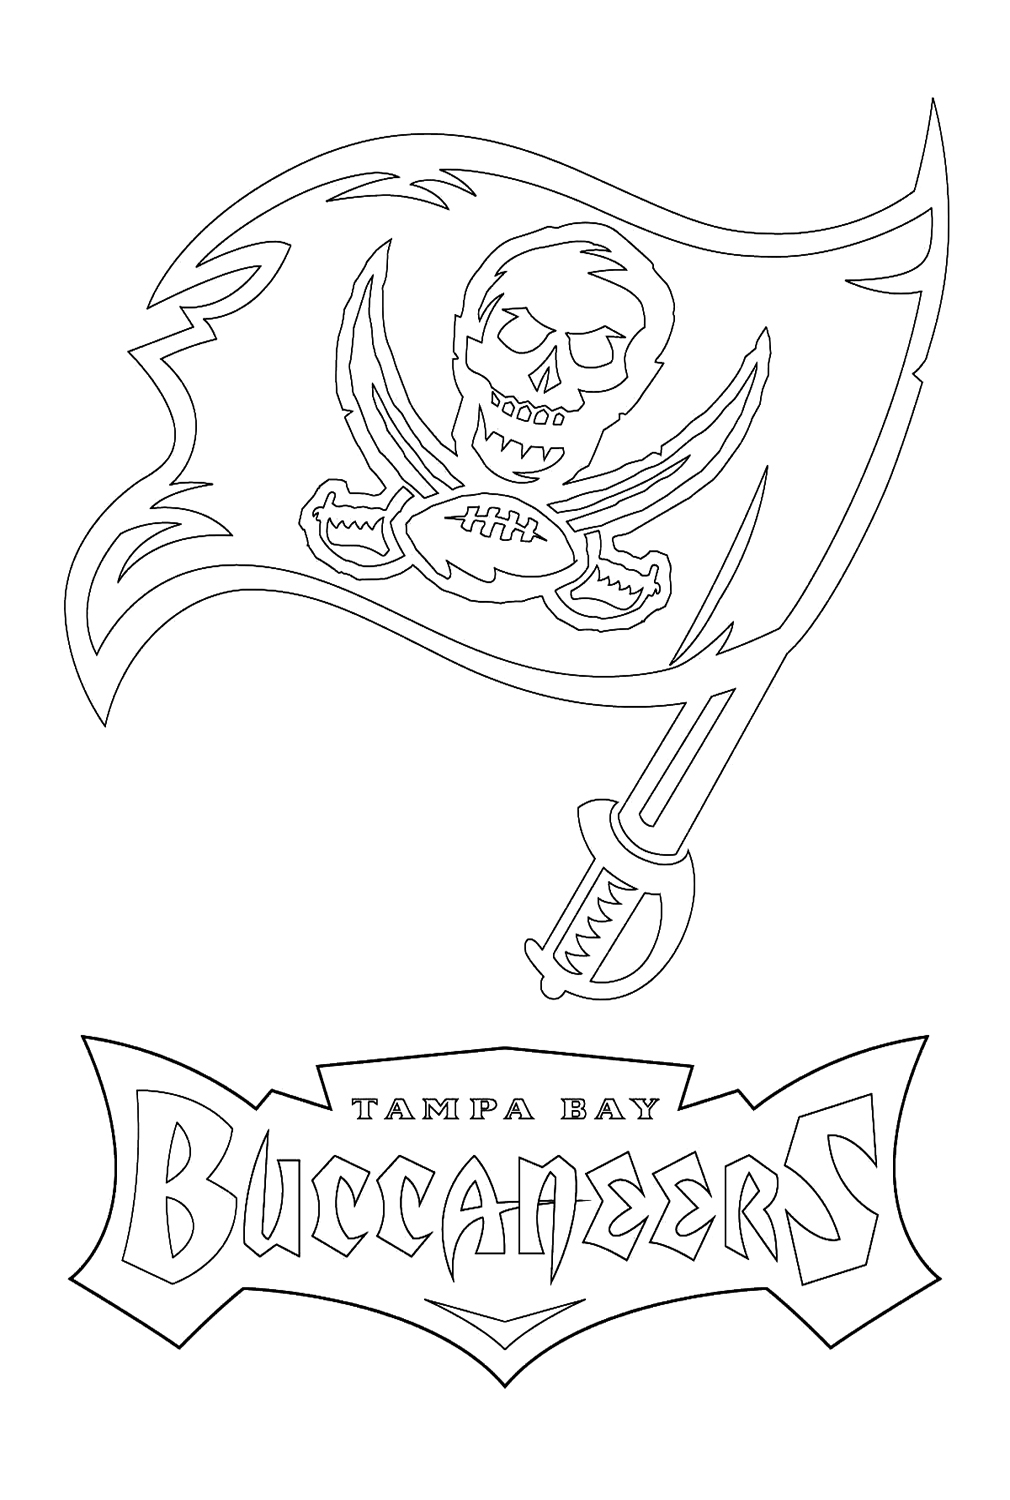 Tampa Bay Buccaneers Logo Coloring Page